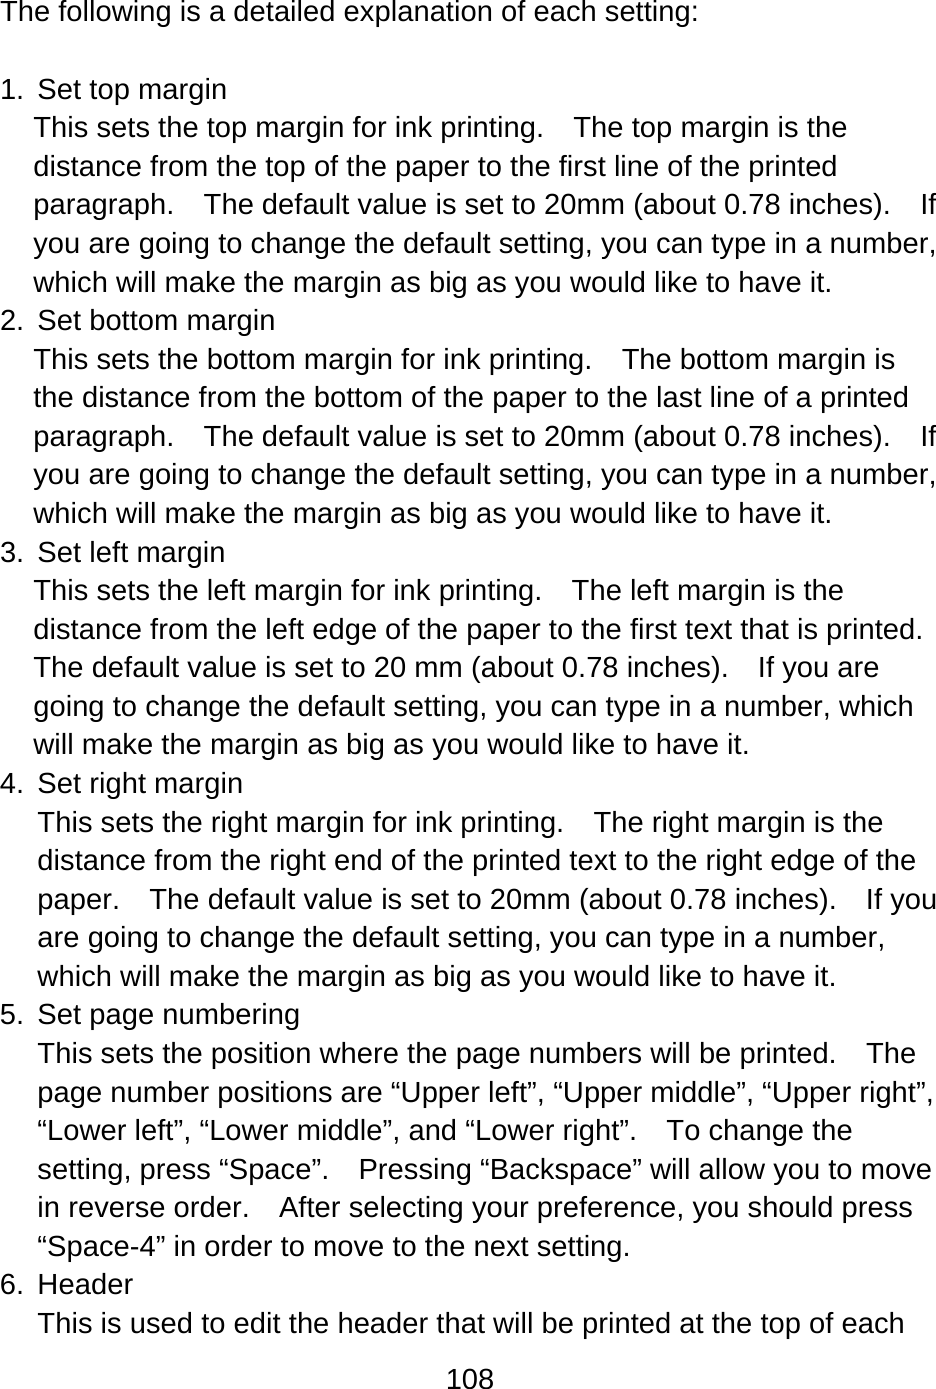 108   The following is a detailed explanation of each setting:  1.  Set top margin This sets the top margin for ink printing.    The top margin is the distance from the top of the paper to the first line of the printed paragraph.  The default value is set to 20mm (about 0.78 inches).    If you are going to change the default setting, you can type in a number, which will make the margin as big as you would like to have it. 2.  Set bottom margin This sets the bottom margin for ink printing.    The bottom margin is the distance from the bottom of the paper to the last line of a printed paragraph.  The default value is set to 20mm (about 0.78 inches).    If you are going to change the default setting, you can type in a number, which will make the margin as big as you would like to have it. 3.  Set left margin This sets the left margin for ink printing.    The left margin is the distance from the left edge of the paper to the first text that is printed.   The default value is set to 20 mm (about 0.78 inches).    If you are going to change the default setting, you can type in a number, which will make the margin as big as you would like to have it. 4. Set right margin This sets the right margin for ink printing.    The right margin is the distance from the right end of the printed text to the right edge of the paper.    The default value is set to 20mm (about 0.78 inches).    If you are going to change the default setting, you can type in a number, which will make the margin as big as you would like to have it. 5. Set page numbering This sets the position where the page numbers will be printed.    The page number positions are “Upper left”, “Upper middle”, “Upper right”, “Lower left”, “Lower middle”, and “Lower right”.    To change the setting, press “Space”.    Pressing “Backspace” will allow you to move in reverse order.    After selecting your preference, you should press “Space-4” in order to move to the next setting. 6. Header This is used to edit the header that will be printed at the top of each 